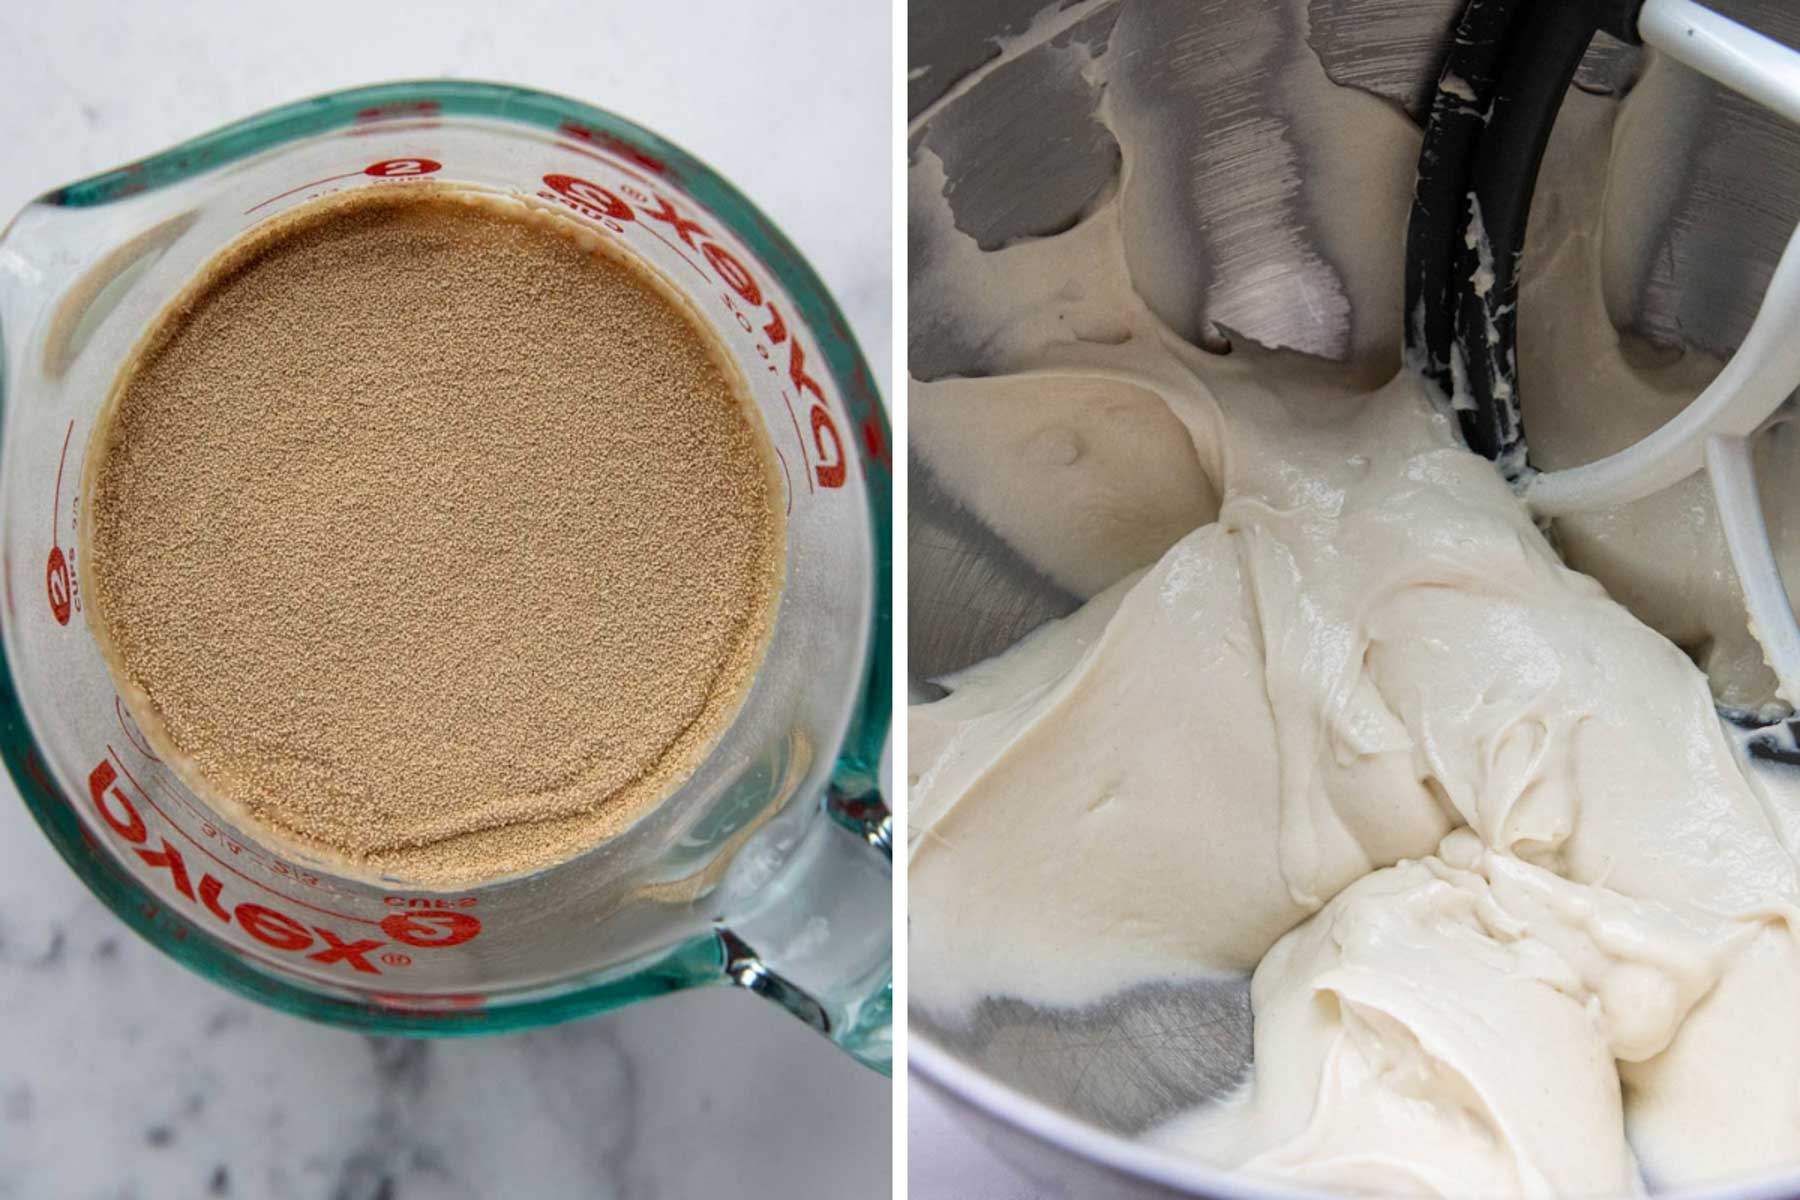 images showing yeast in water and bread dough in a mixer